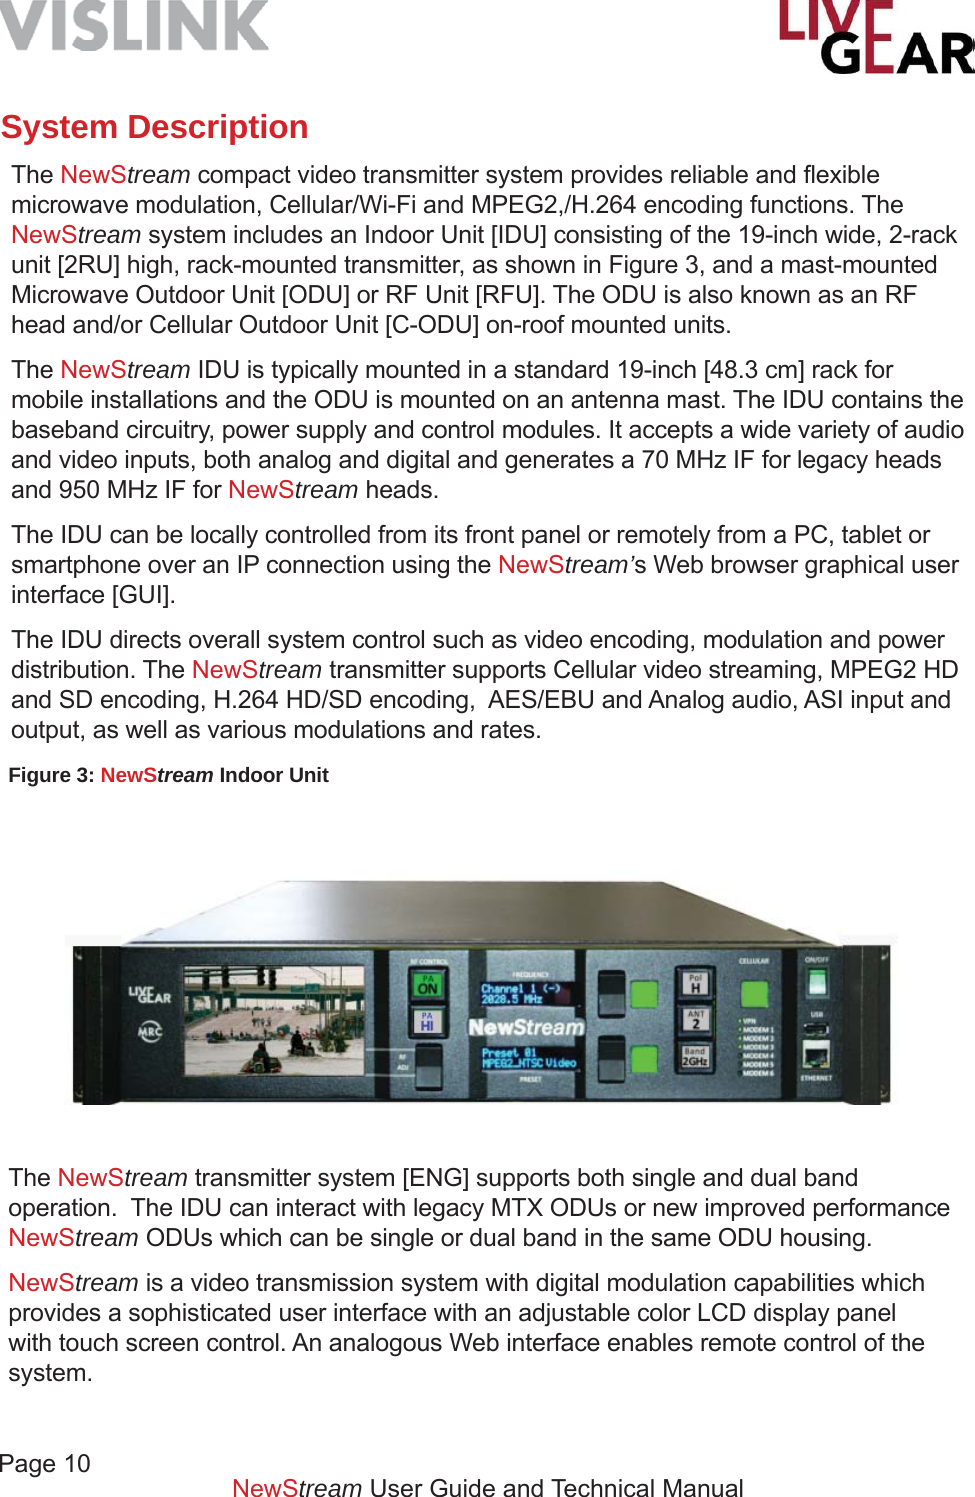 Page 10NewStream User Guide and Technical ManualSystem DescriptionThe NewStream compact video transmitter system provides reliable and ﬂ exible microwave modulation, Cellular/Wi-Fi and MPEG2,/H.264 encoding functions. The NewStream system includes an Indoor Unit [IDU] consisting of the 19-inch wide, 2-rack unit [2RU] high, rack-mounted transmitter, as shown in Figure 3, and a mast-mounted Microwave Outdoor Unit [ODU] or RF Unit [RFU]. The ODU is also known as an RF head and/or Cellular Outdoor Unit [C-ODU] on-roof mounted units.The NewStream IDU is typically mounted in a standard 19-inch [48.3 cm] rack for mobile installations and the ODU is mounted on an antenna mast. The IDU contains the baseband circuitry, power supply and control modules. It accepts a wide variety of audio and video inputs, both analog and digital and generates a 70 MHz IF for legacy heads and 950 MHz IF for NewStream heads.The IDU can be locally controlled from its front panel or remotely from a PC, tablet or smartphone over an IP connection using the NewStream’s Web browser graphical user interface [GUI].The IDU directs overall system control such as video encoding, modulation and power distribution. The NewStream transmitter supports Cellular video streaming, MPEG2 HD and SD encoding, H.264 HD/SD encoding,  AES/EBU and Analog audio, ASI input and output, as well as various modulations and rates.Figure 3: NewStream Indoor UnitThe NewStream transmitter system [ENG] supports both single and dual band operation.  The IDU can interact with legacy MTX ODUs or new improved performance NewStream ODUs which can be single or dual band in the same ODU housing.NewStream is a video transmission system with digital modulation capabilities which provides a sophisticated user interface with an adjustable color LCD display panel with touch screen control. An analogous Web interface enables remote control of the system. 